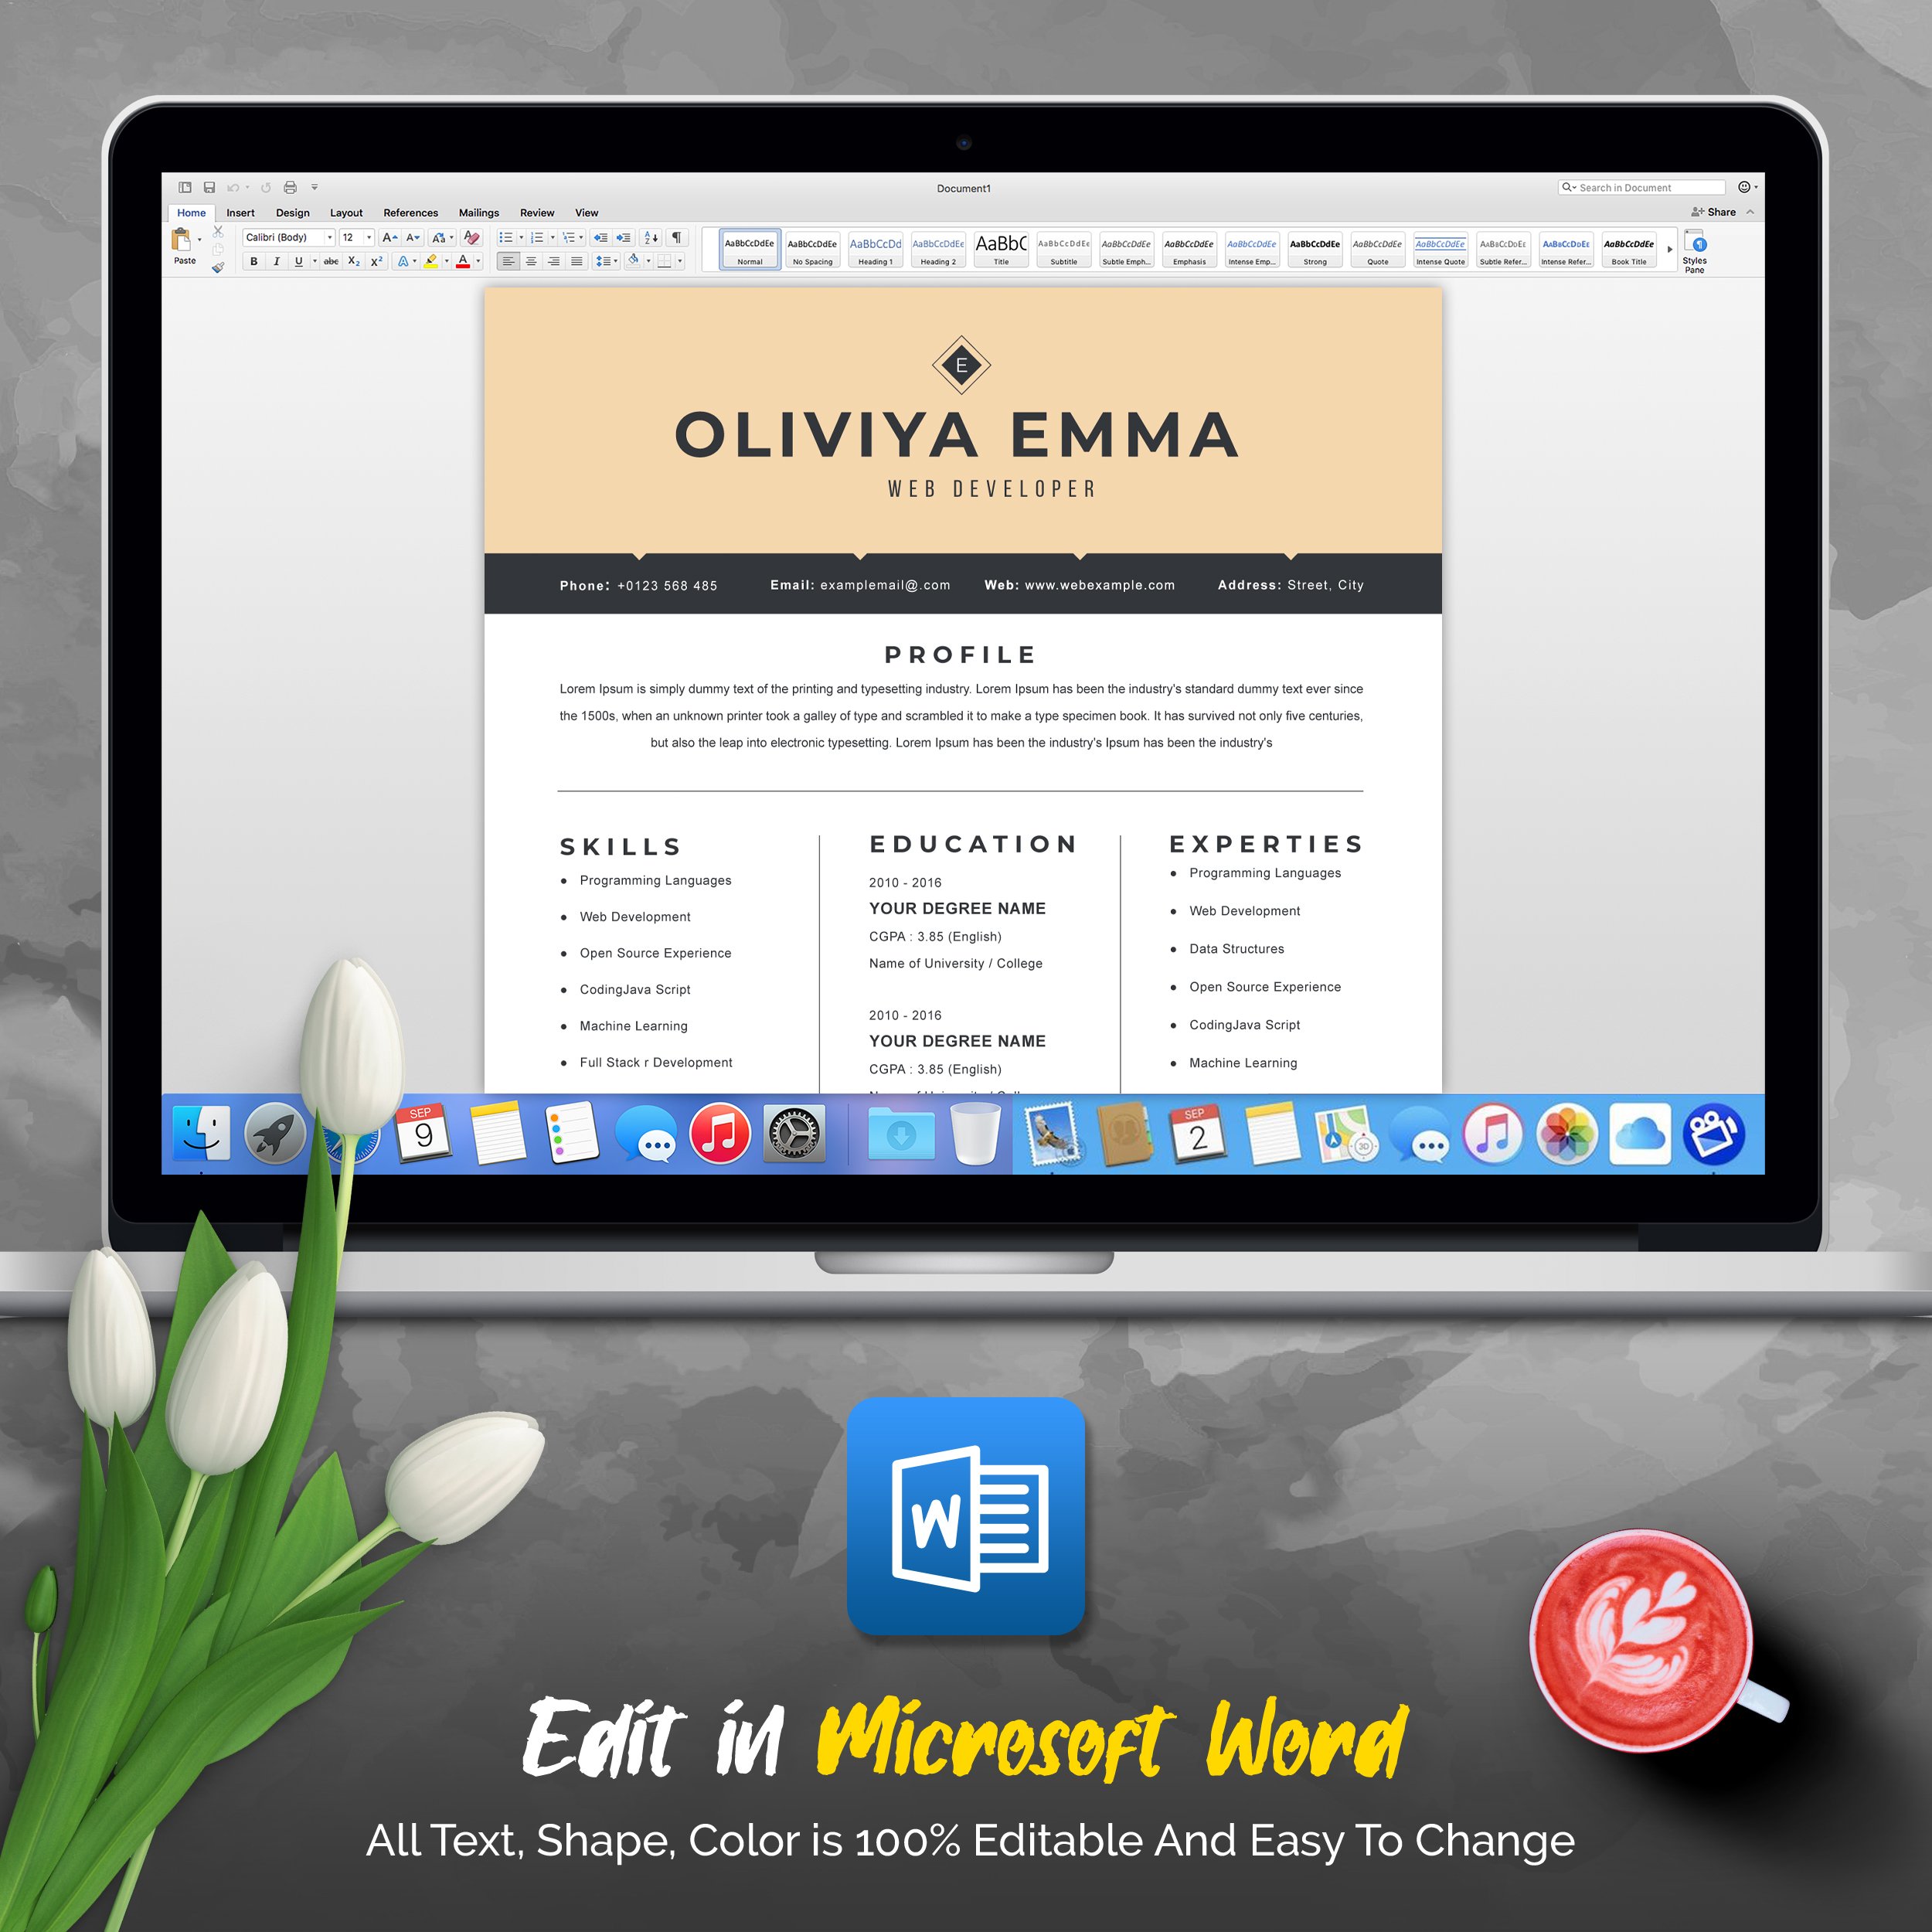 04 3 pages professional ms word aple pages eps photoshop psd resume cv design template design by resume inventor 83